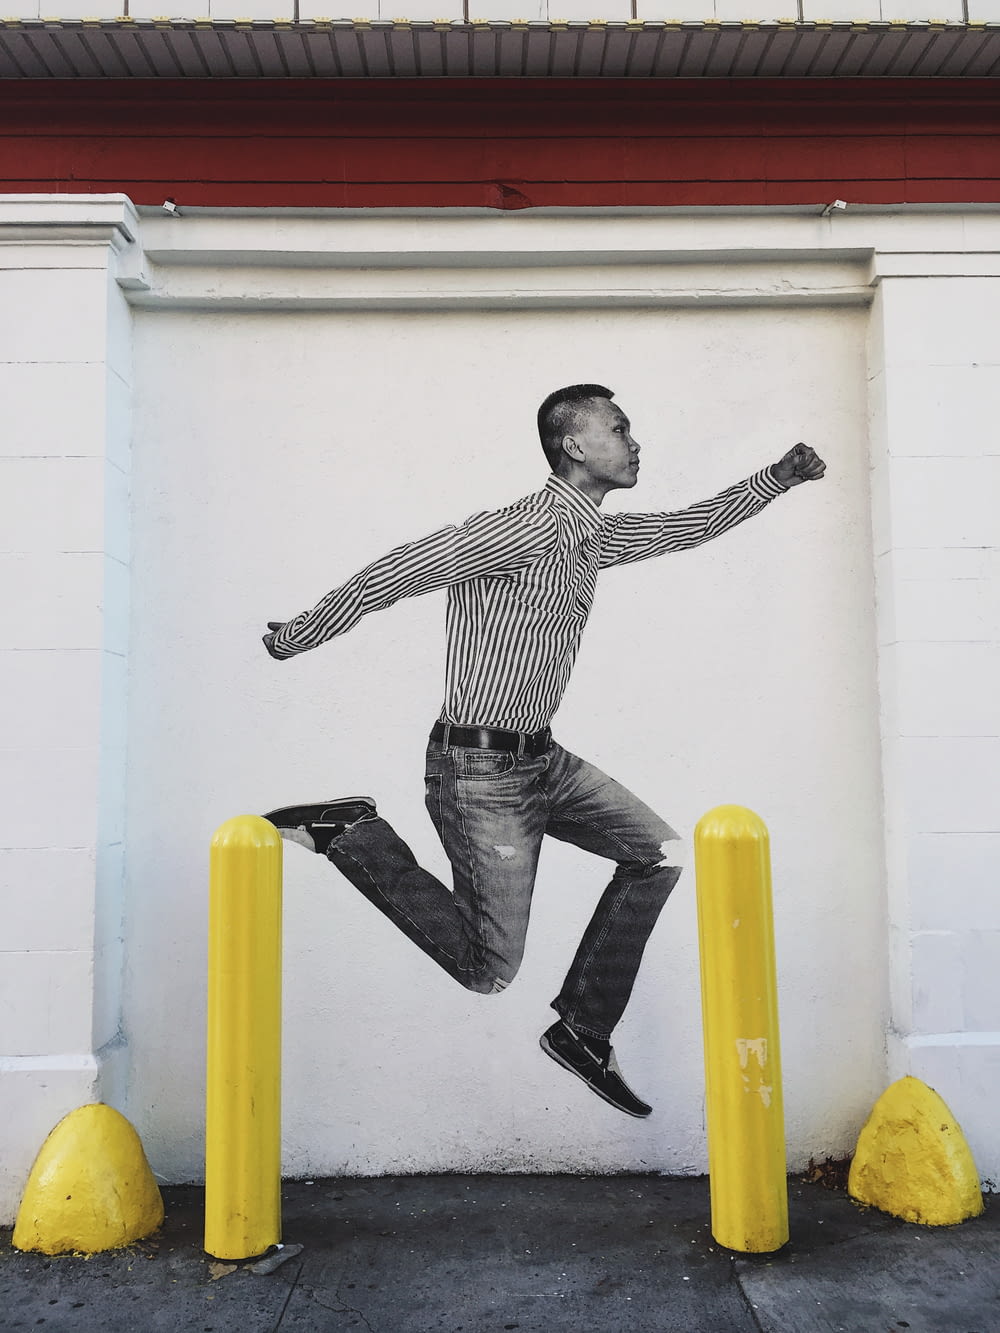 a painting of a man jumping over yellow poles